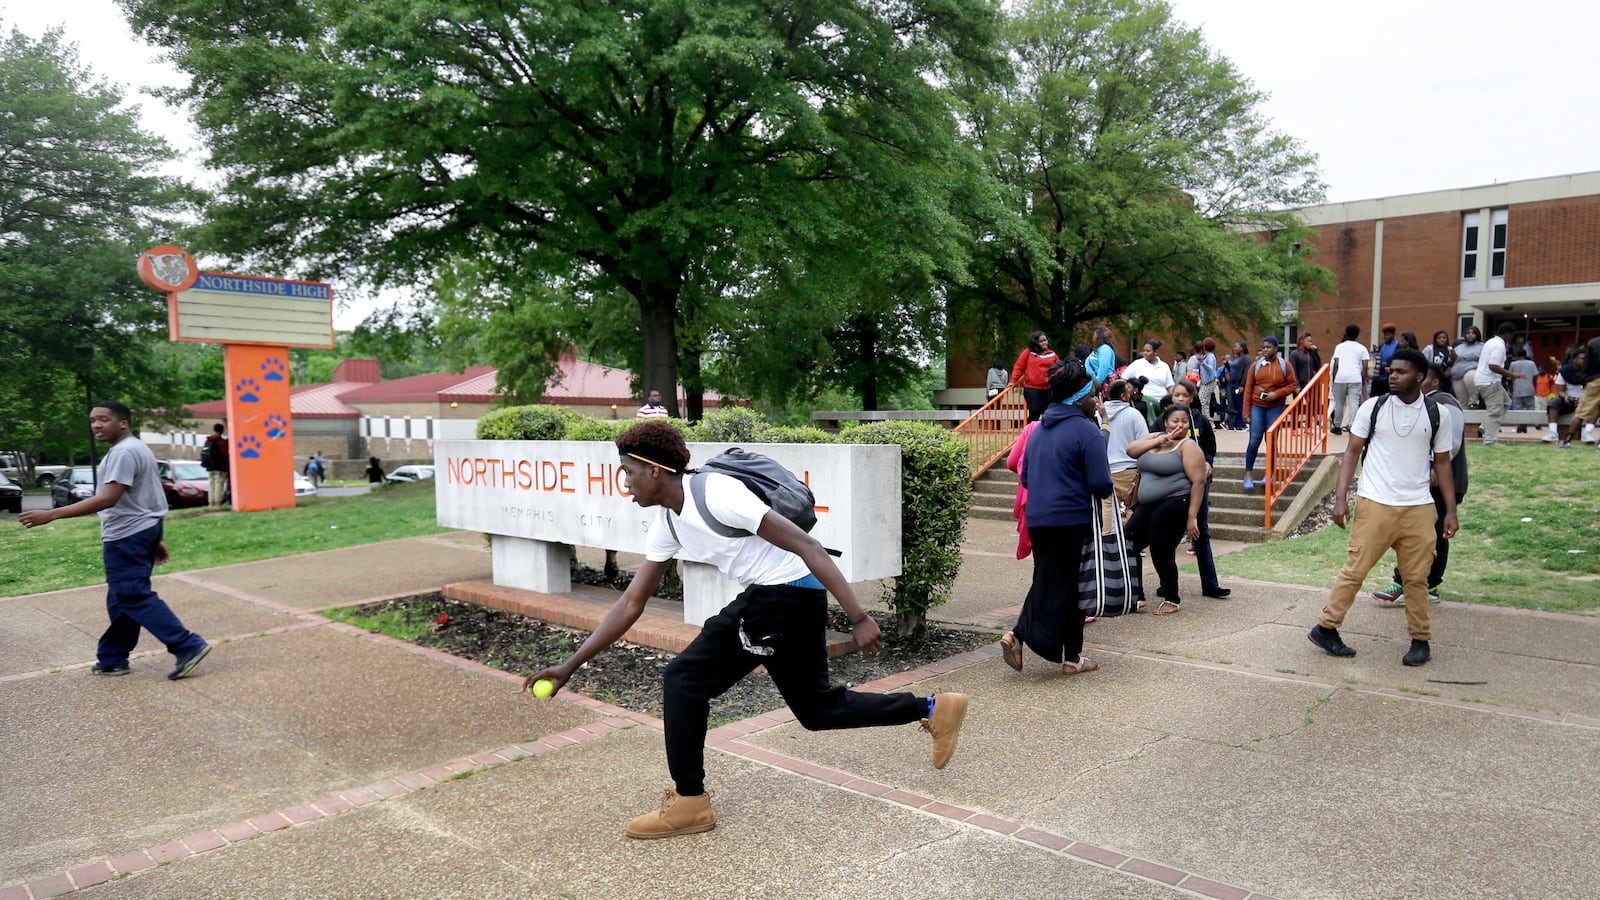 Samone Nelson chases down a tennis ball as he leaves Northside High School last spring, before the high school was shuttered. Once one of the largest high schools in Memphis, Northside had just 190 students during its final year of operation.